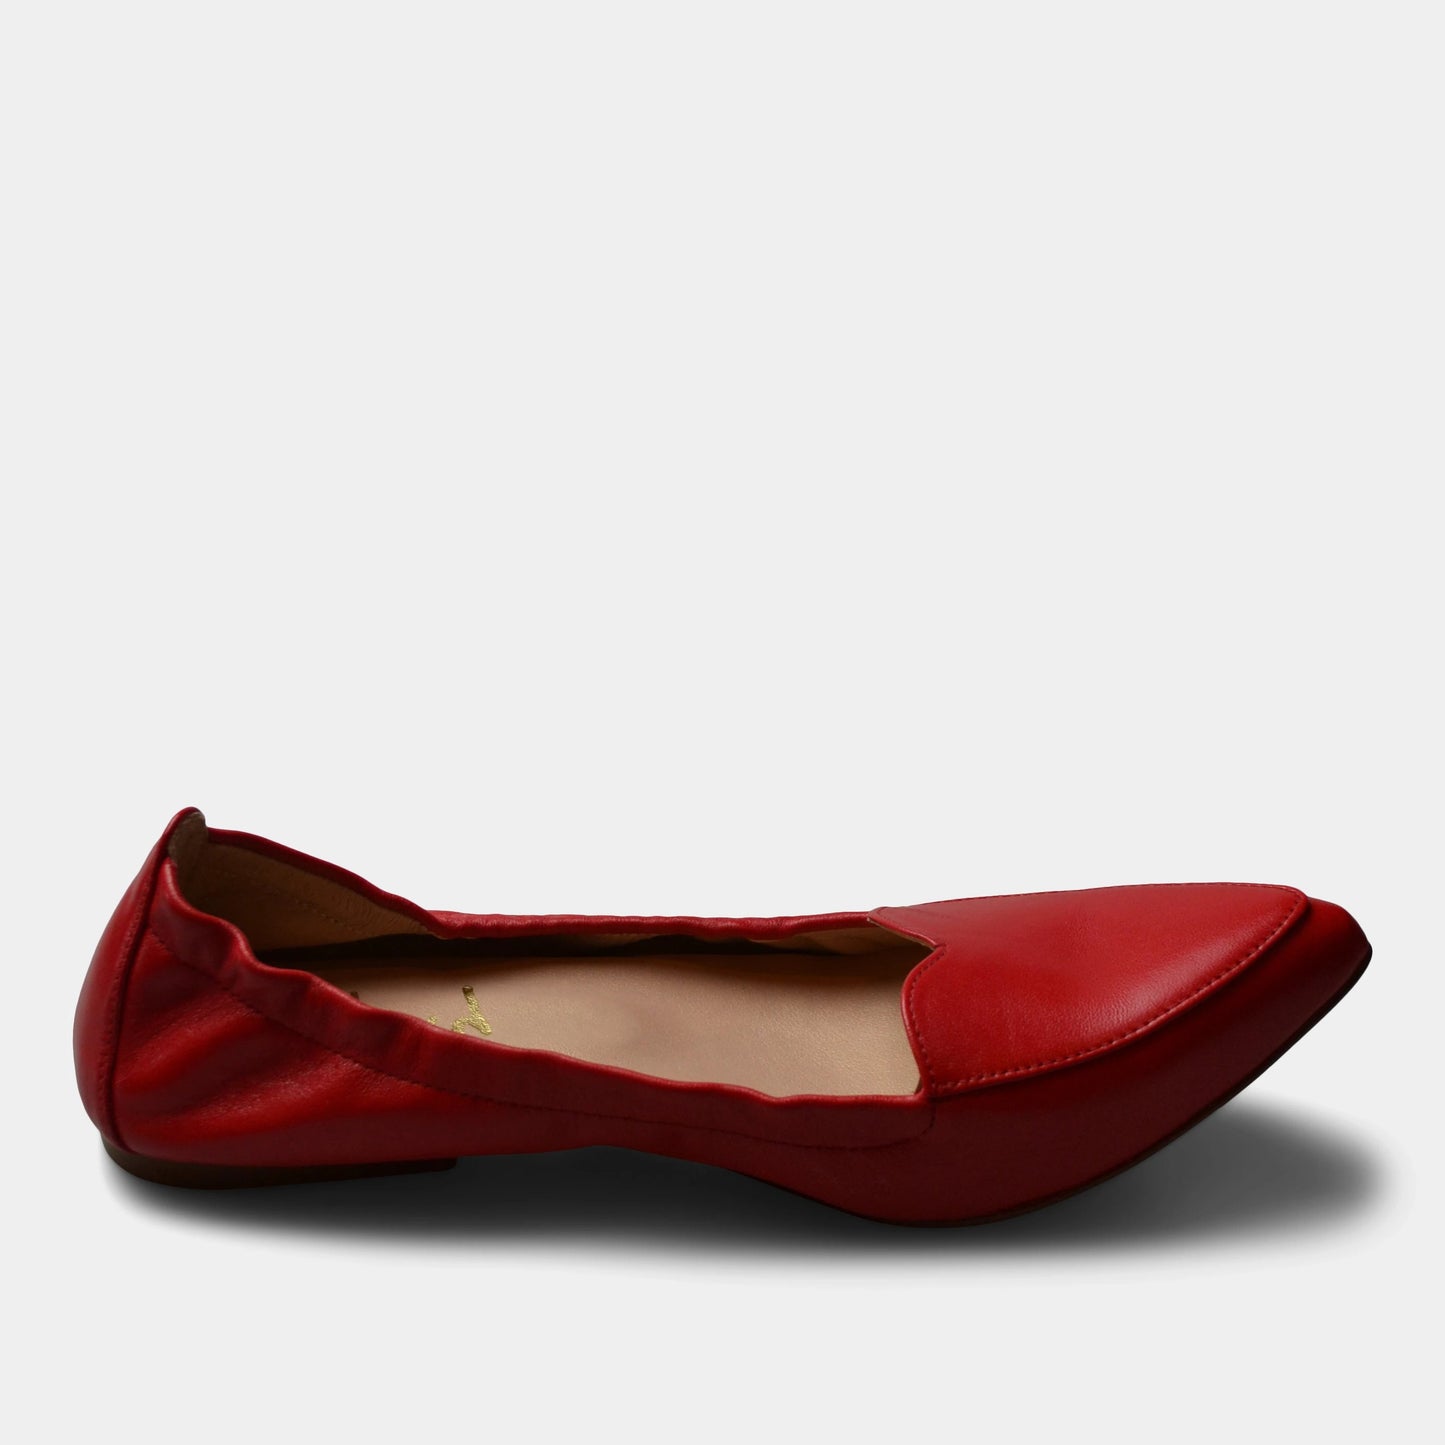 FRENCH SOLE HEART CLAUDIA FLAT IN RED